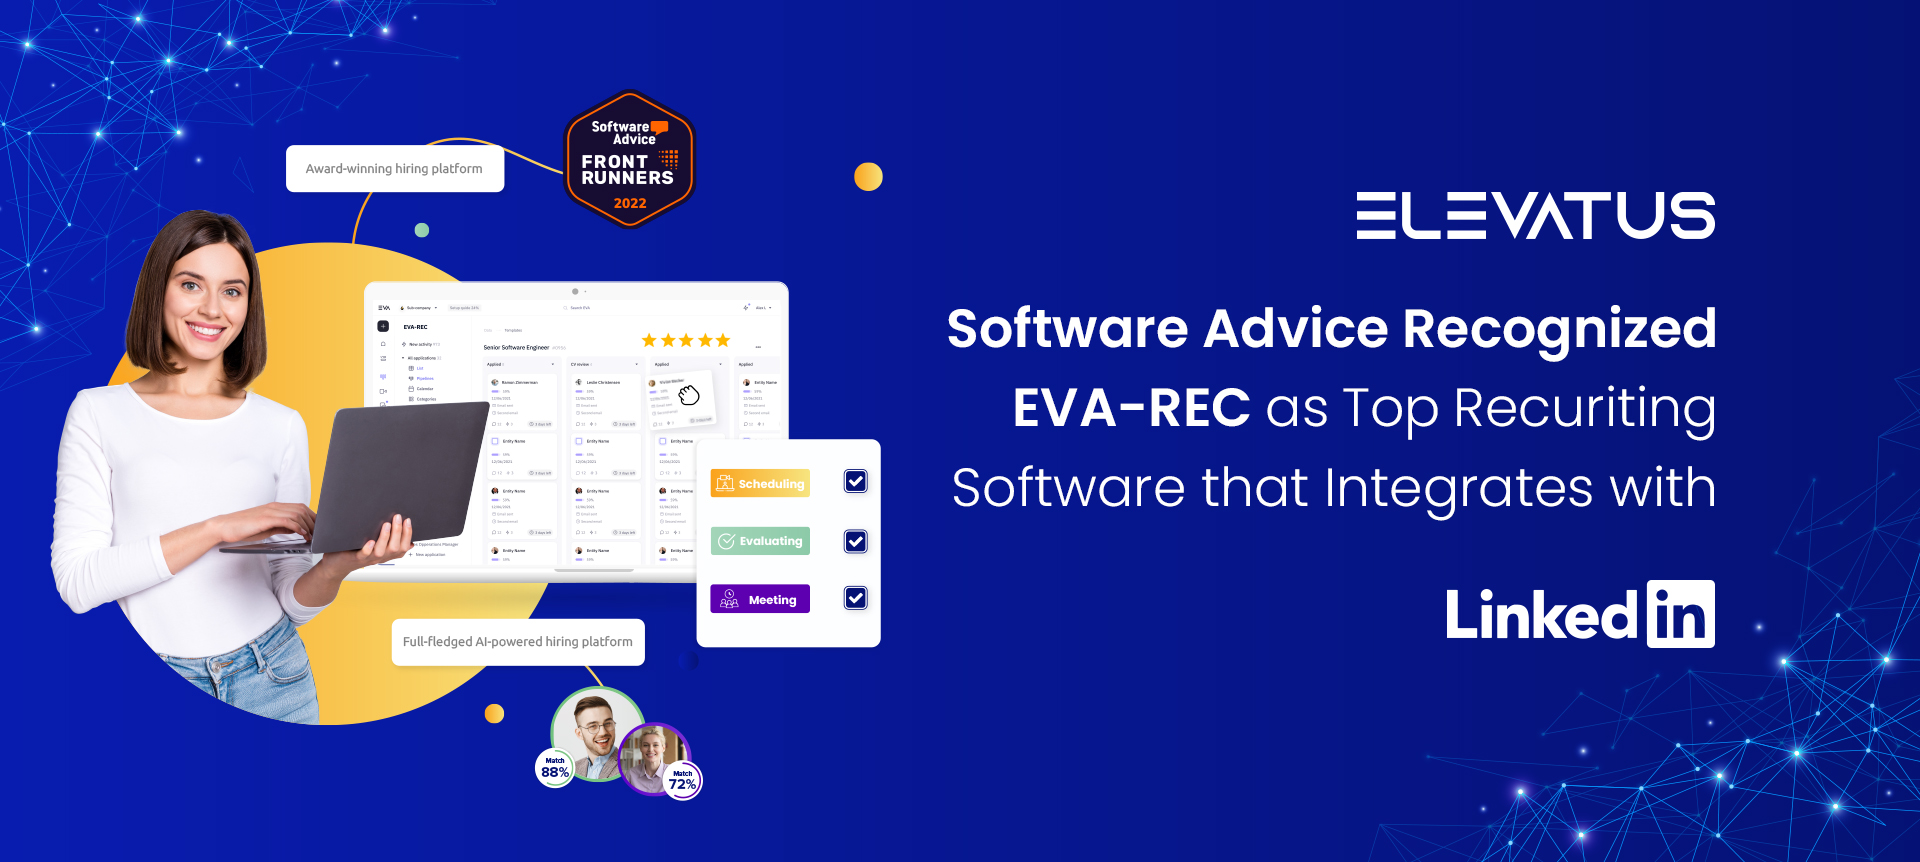 EVA-REC Recognized as Top Recruiting Software By Software Advice